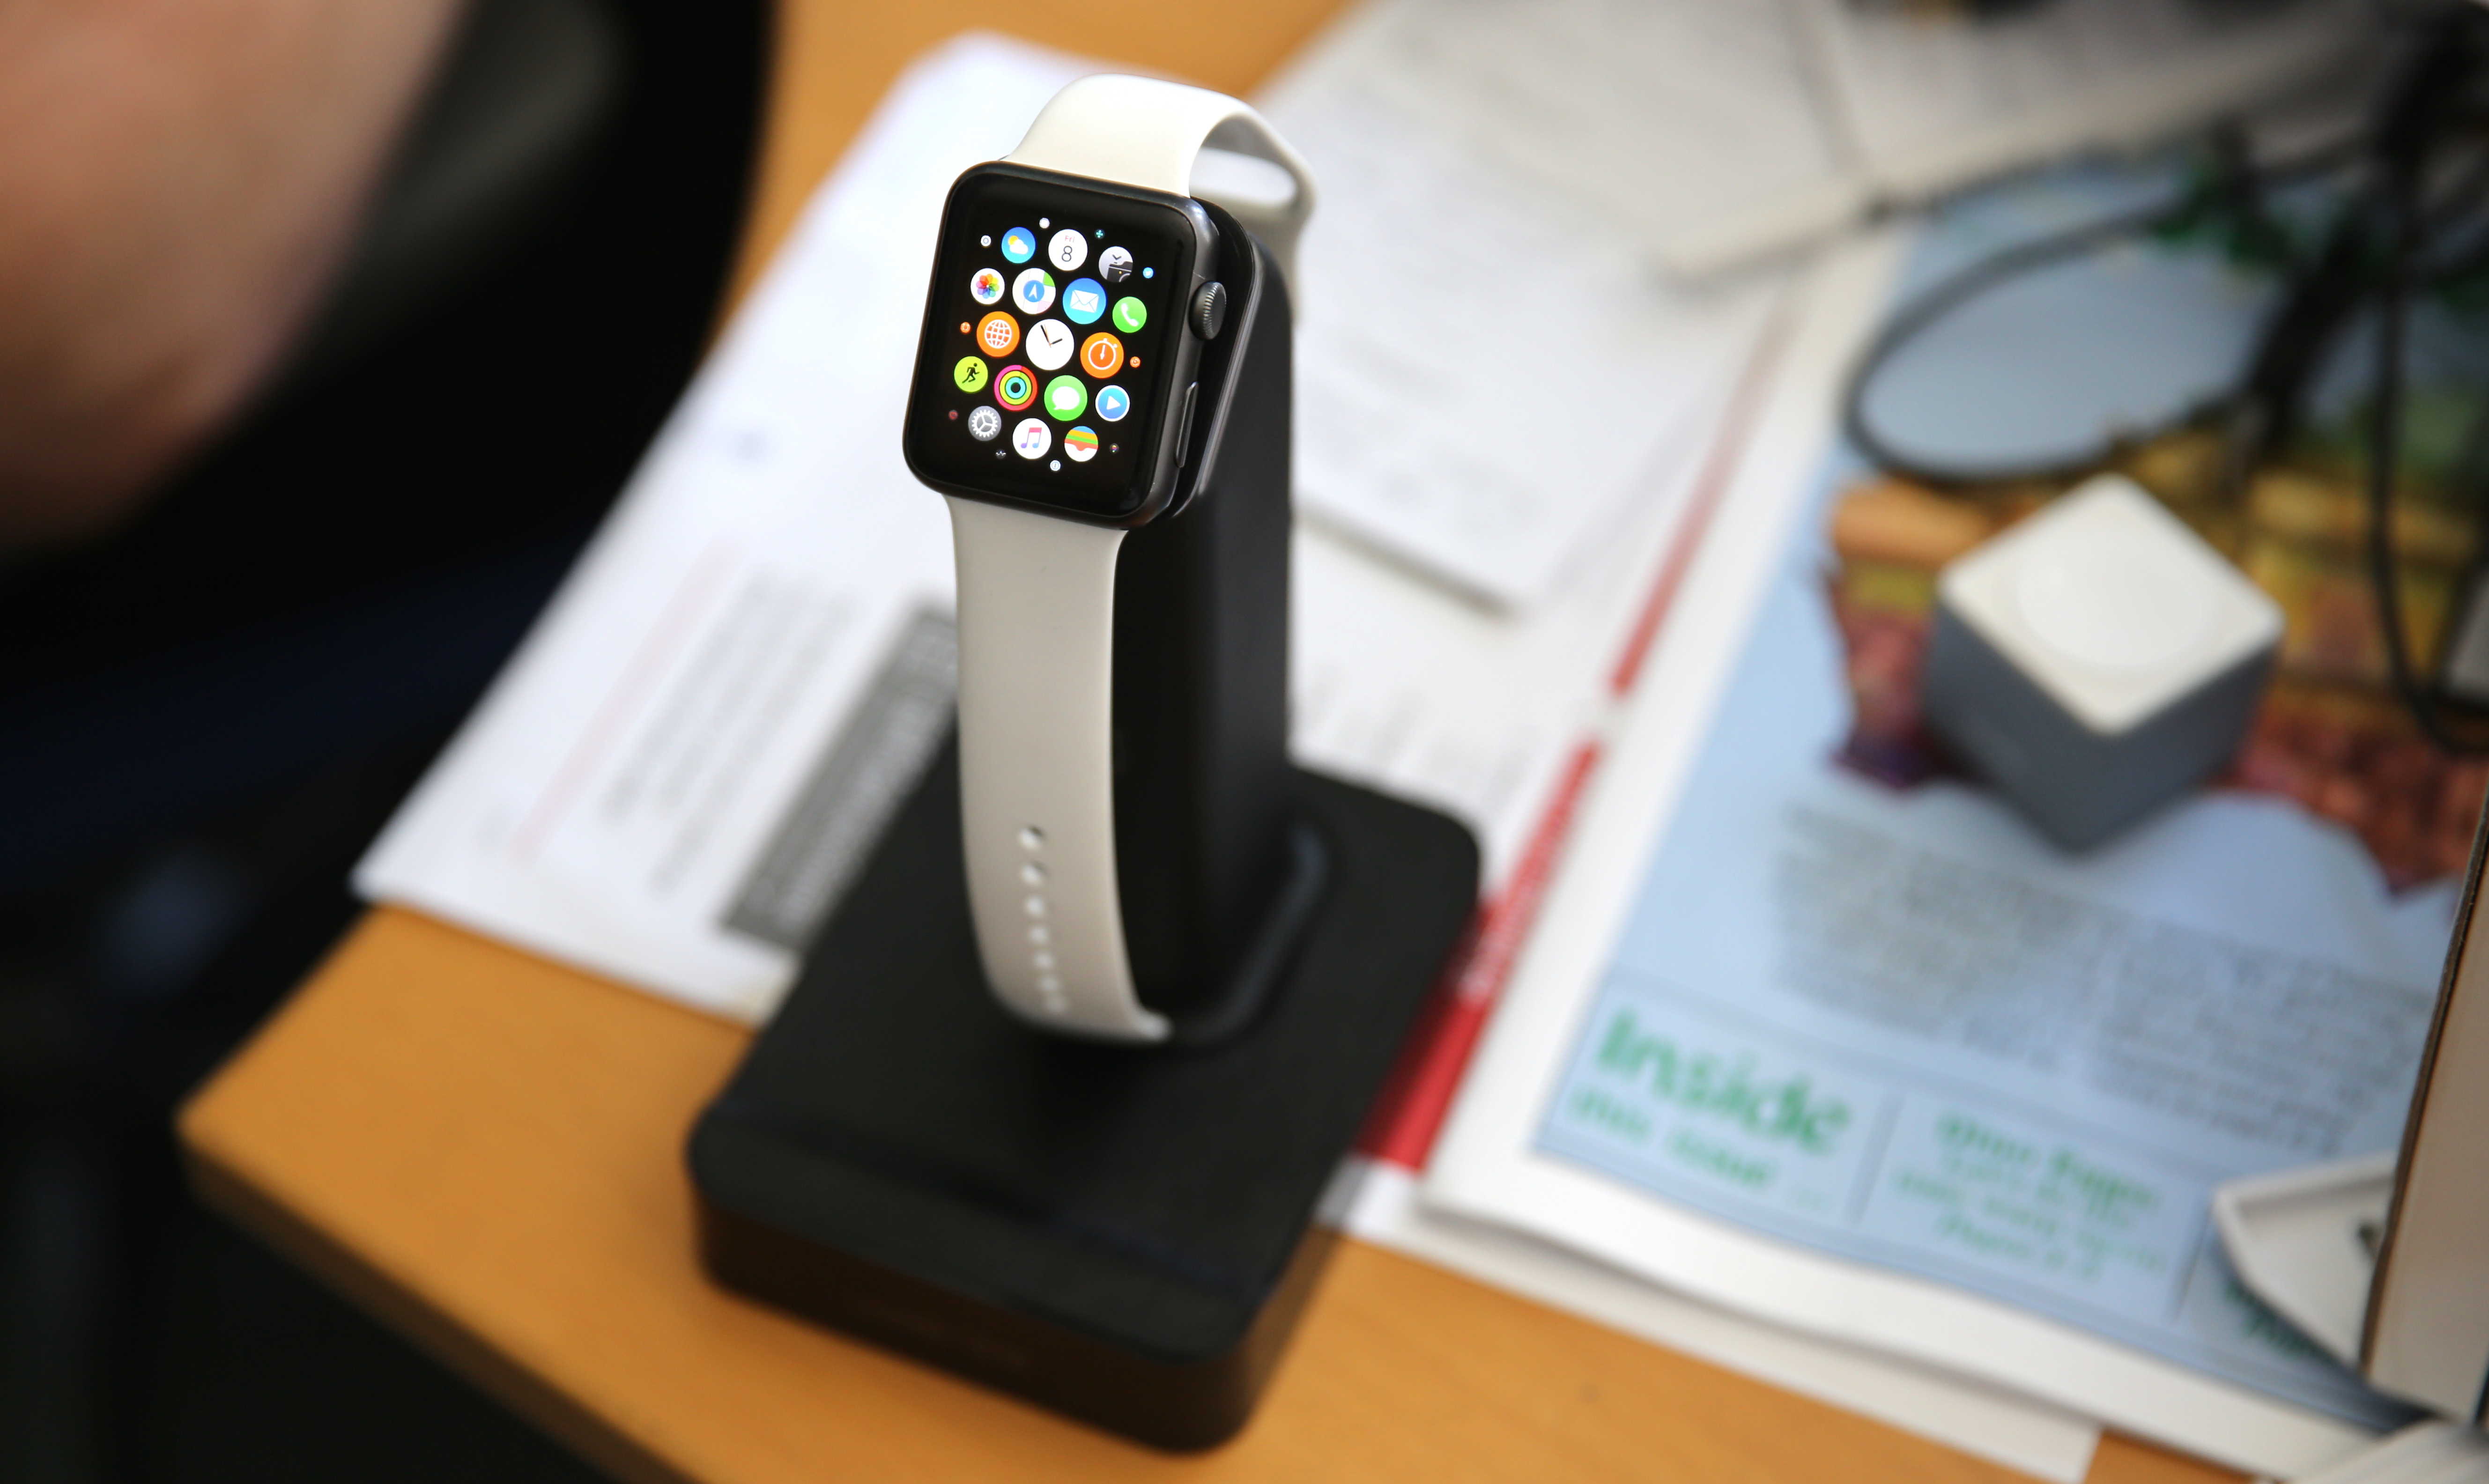 Oddly shaped Apple Watch charger brings joy of video? [Reviews